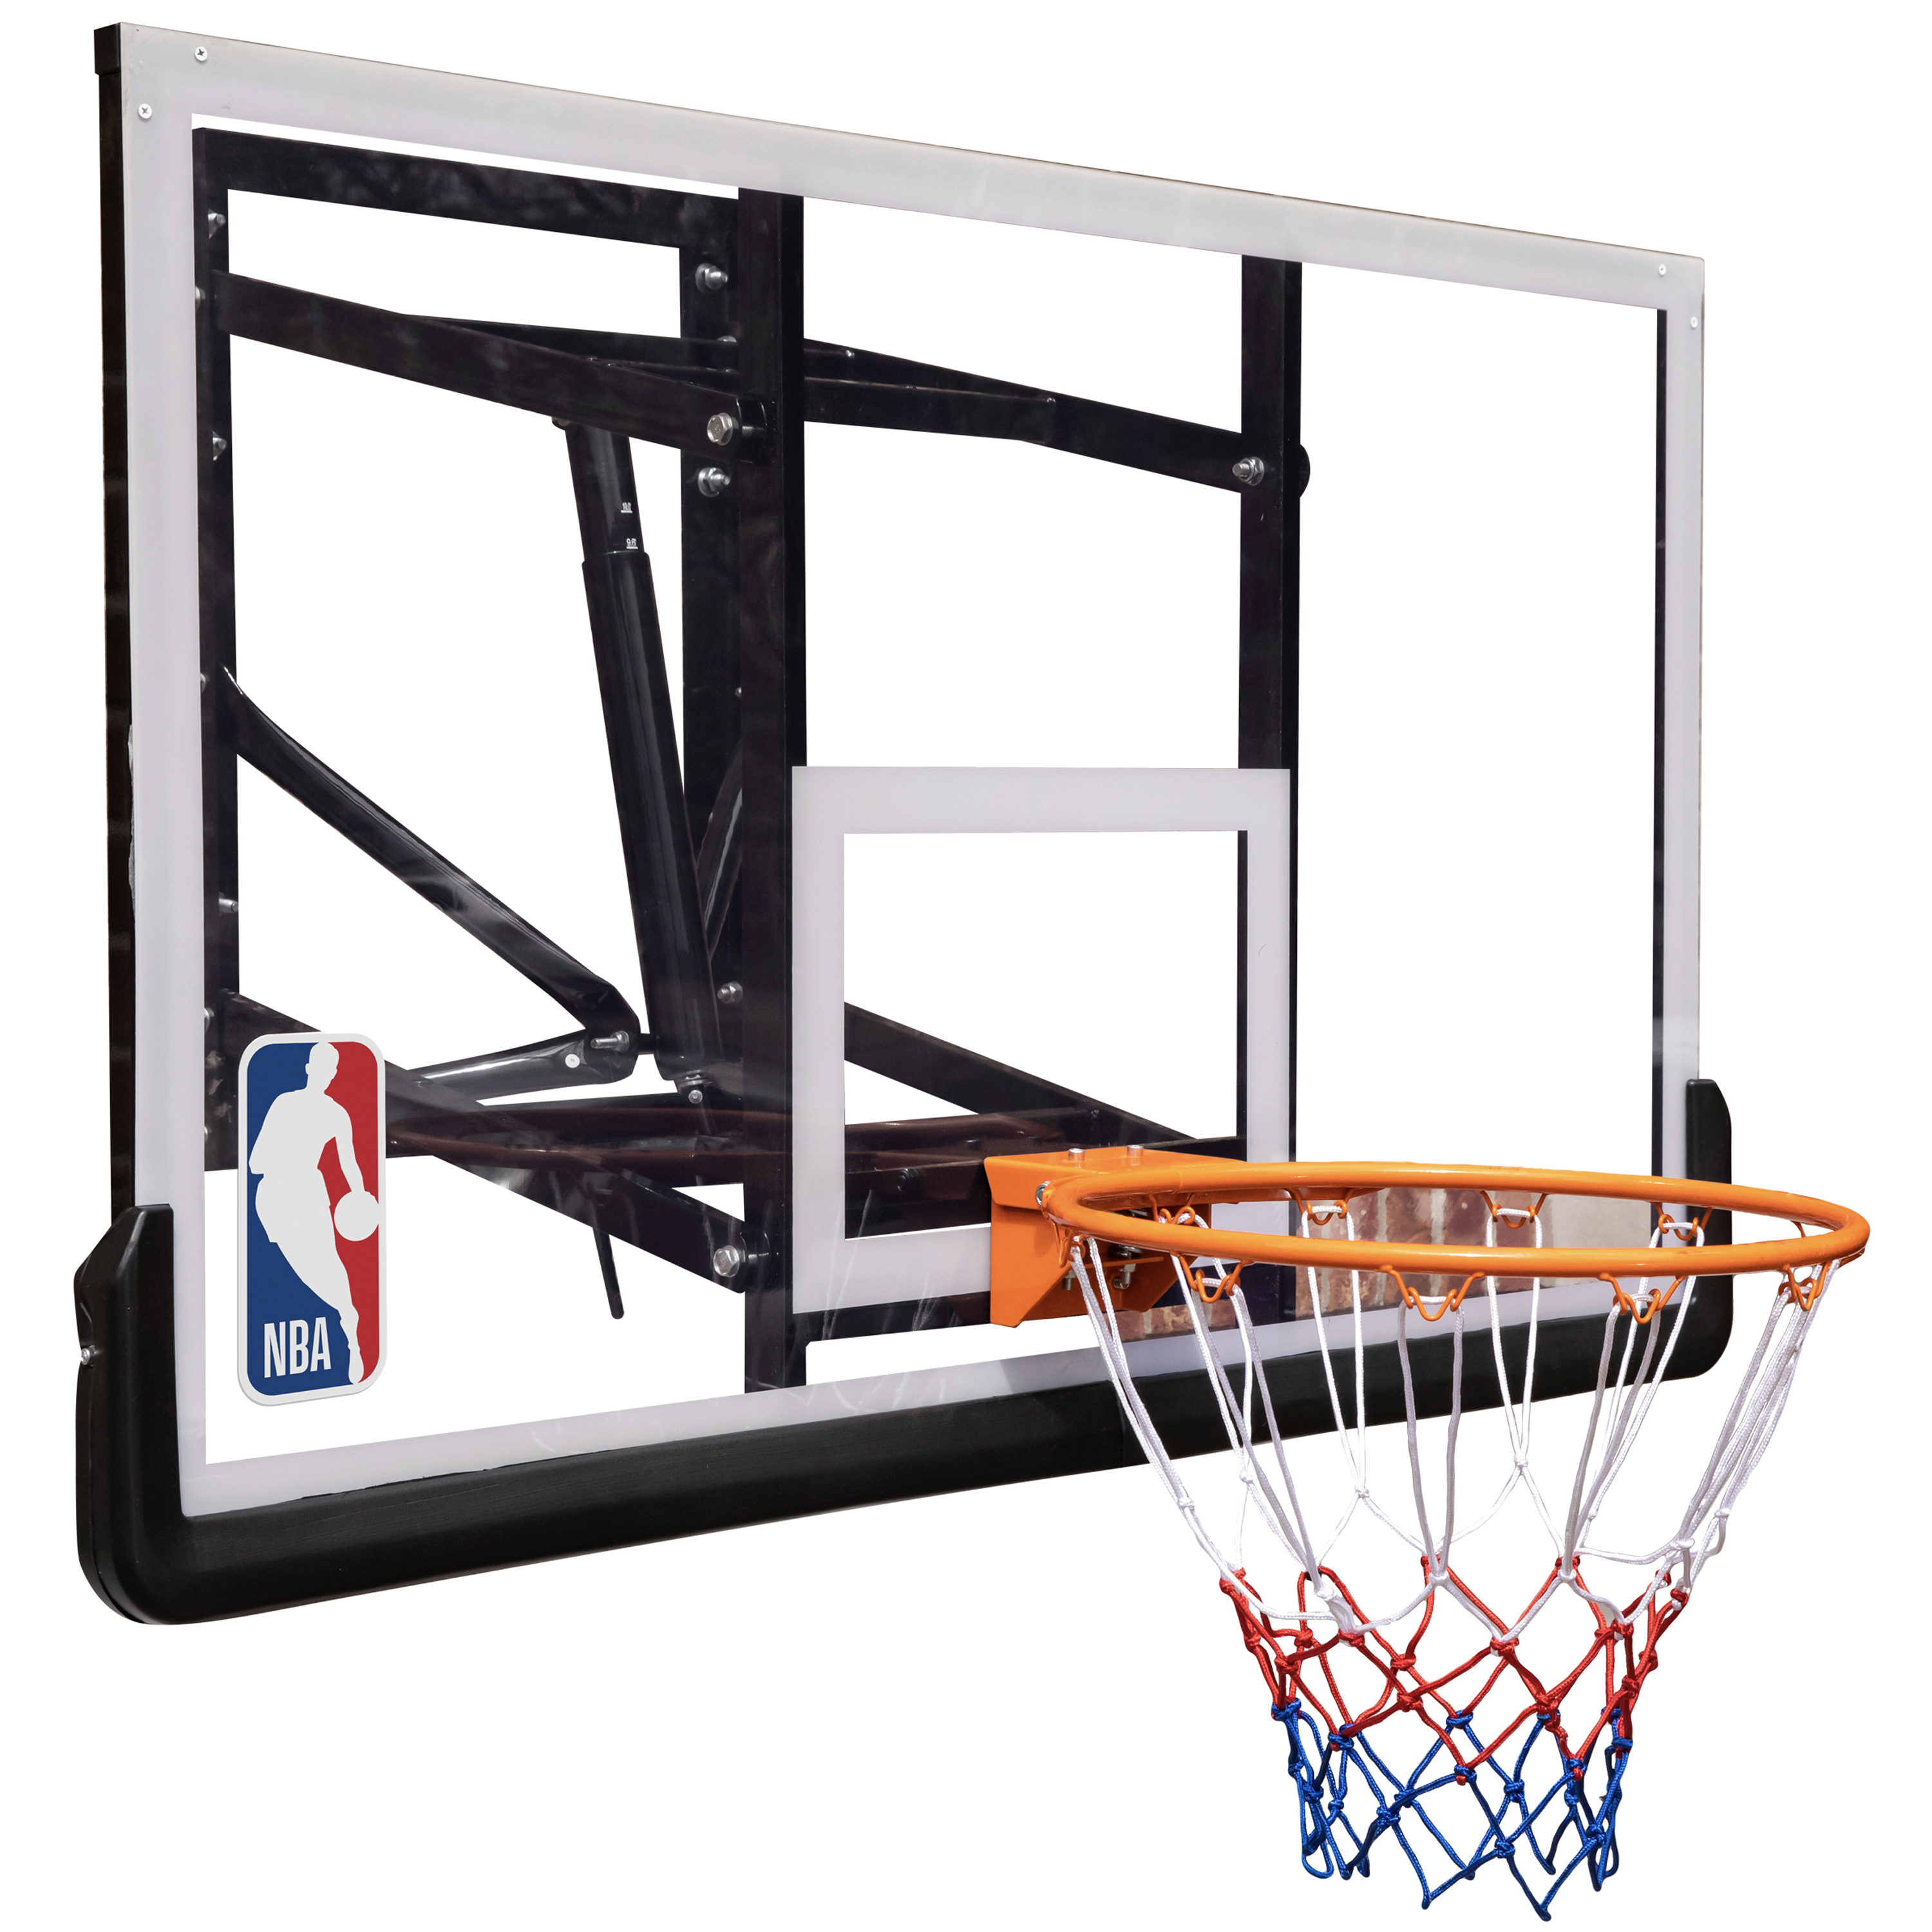 NBA Official 54 In. Wall-Mounted Basketball Hoop with Polycarbonate Backboard - image 1 of 9